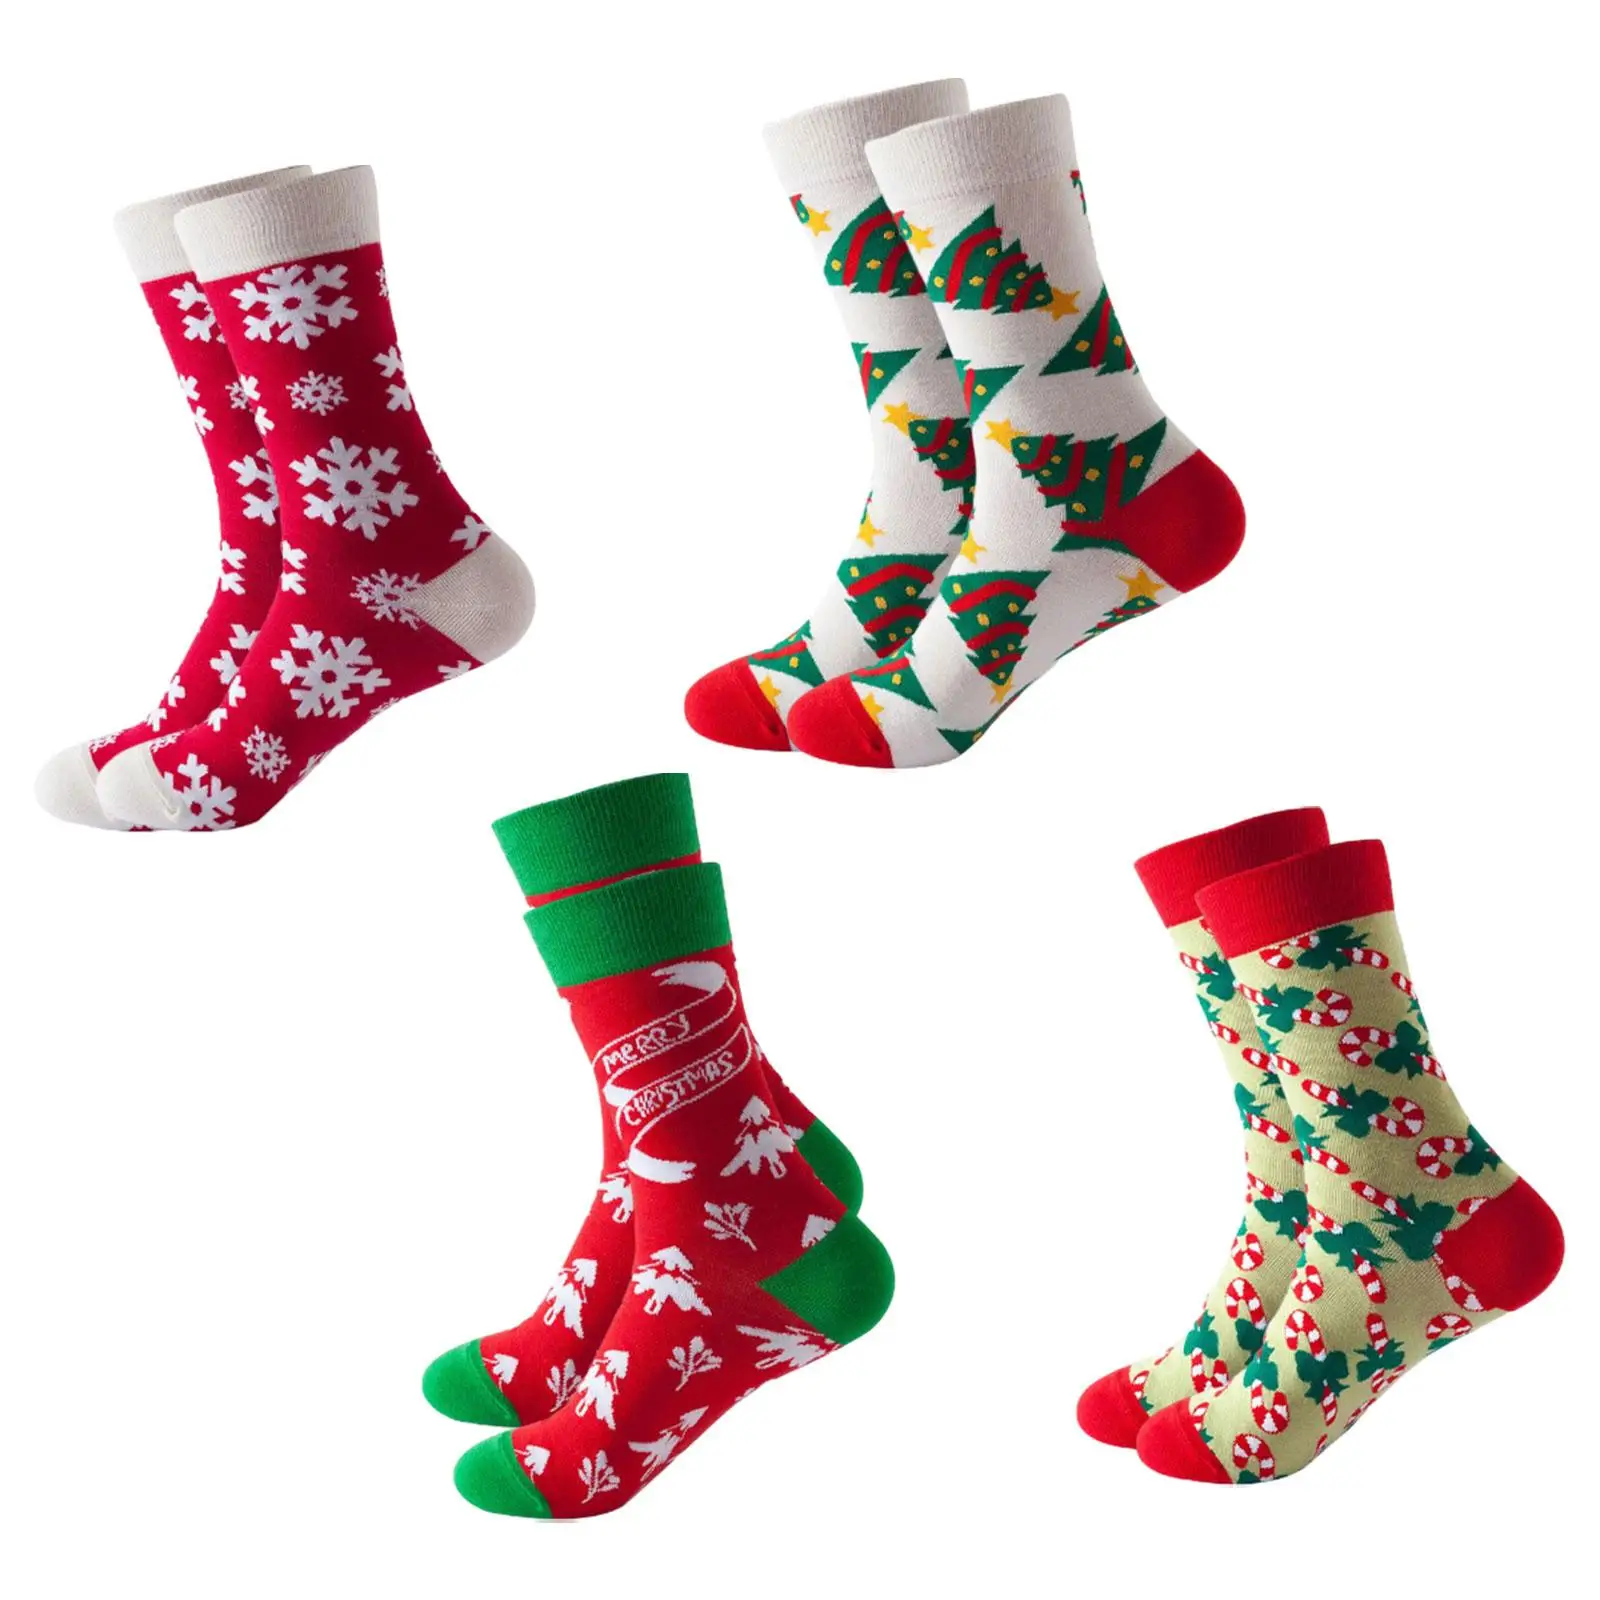 4 Pairs Christmas Socks Boot Stockings Thick Fashion Soft Warmer Socks for Work Cold Weather Daily Wear Festival Fancy Christmas